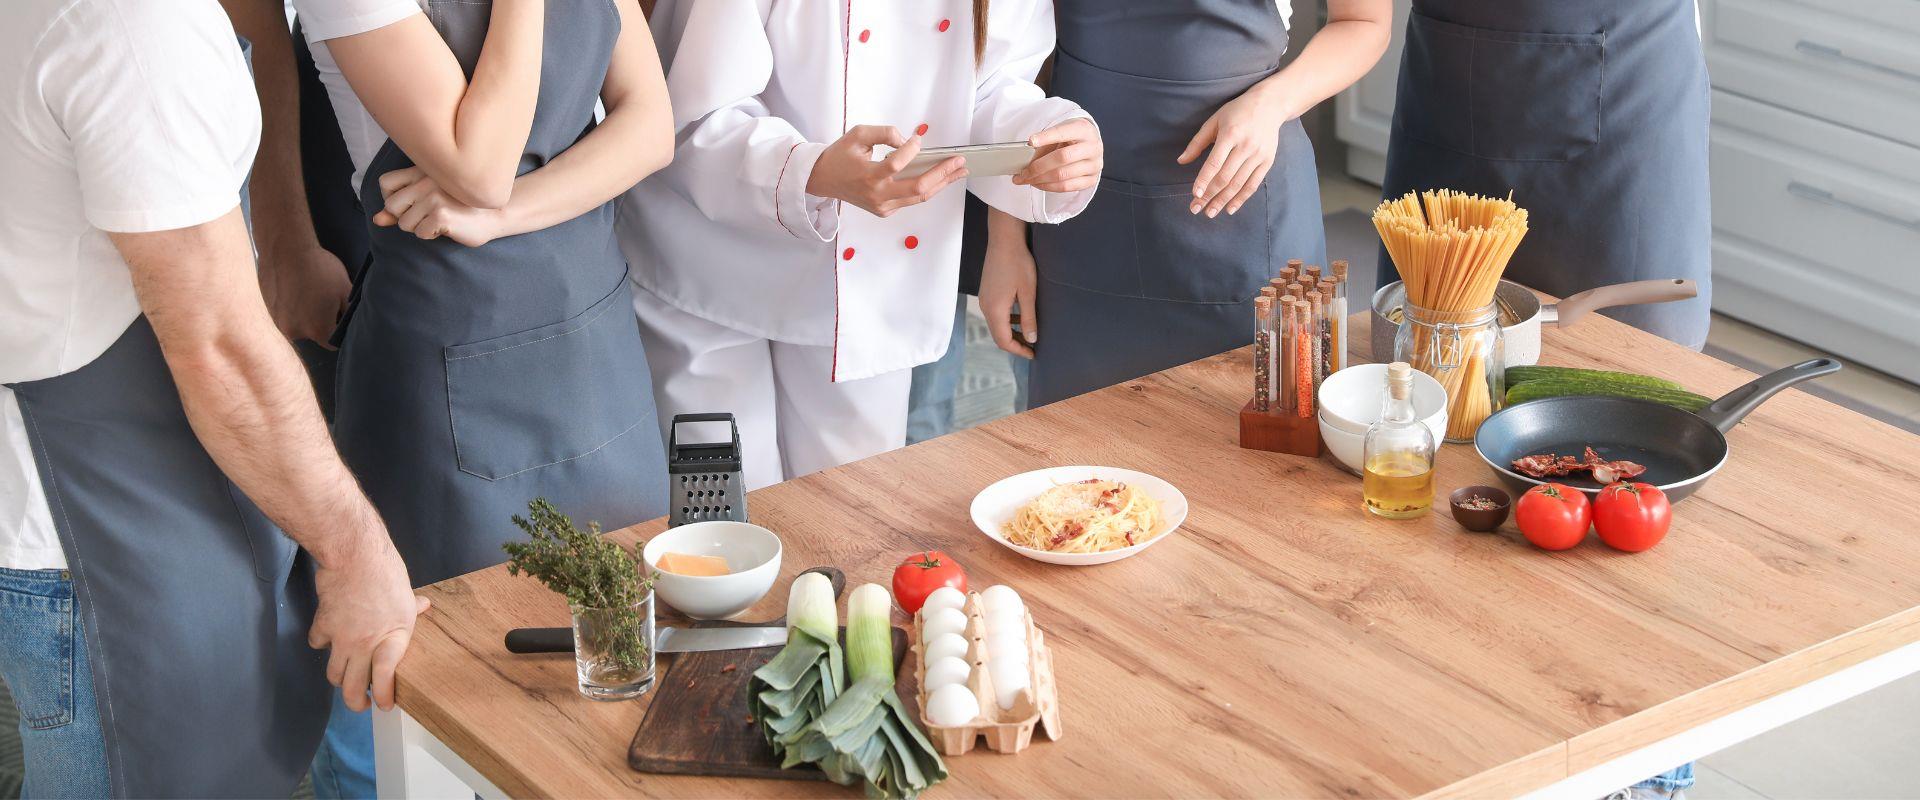 A team building experience in the kitchen: Best Western Park Hotel welcomes your company for an engaging team building in the kitchen!